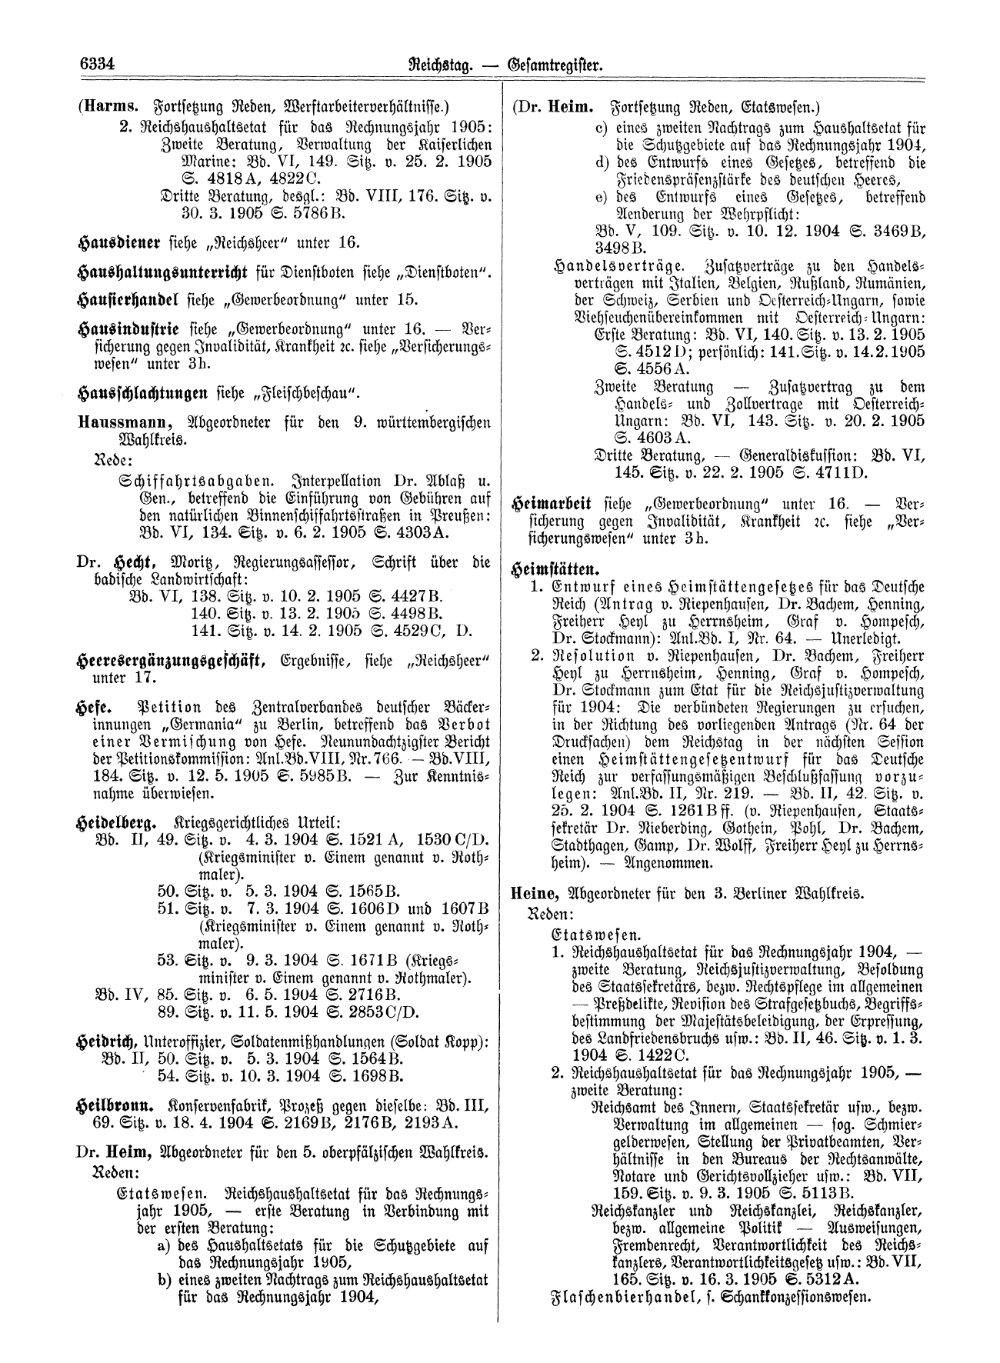 Scan of page 6334